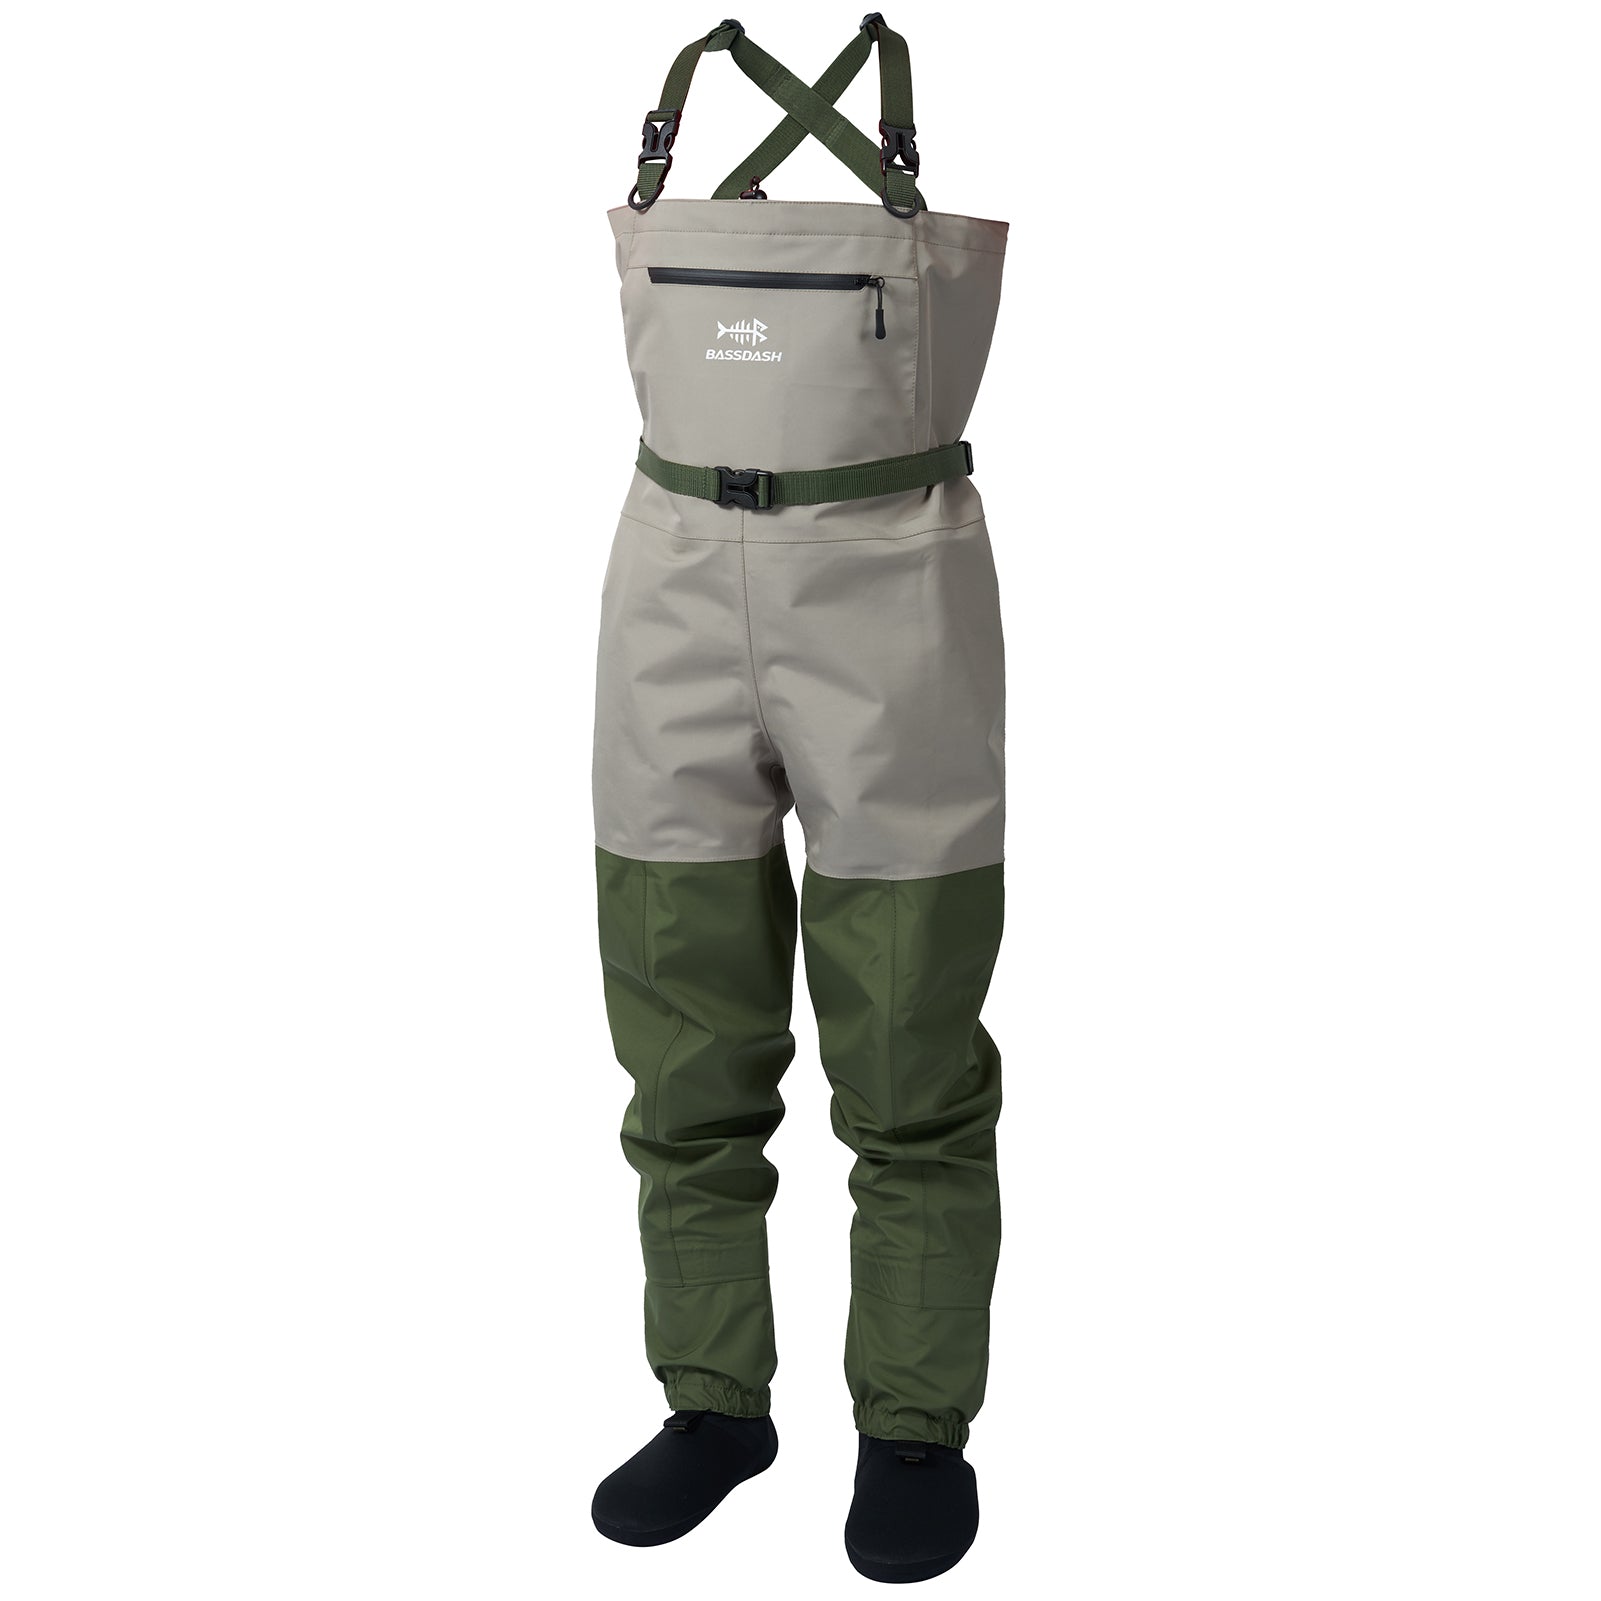 Fly Fishing Stocking Foot Chest Waders Affordable Breathable